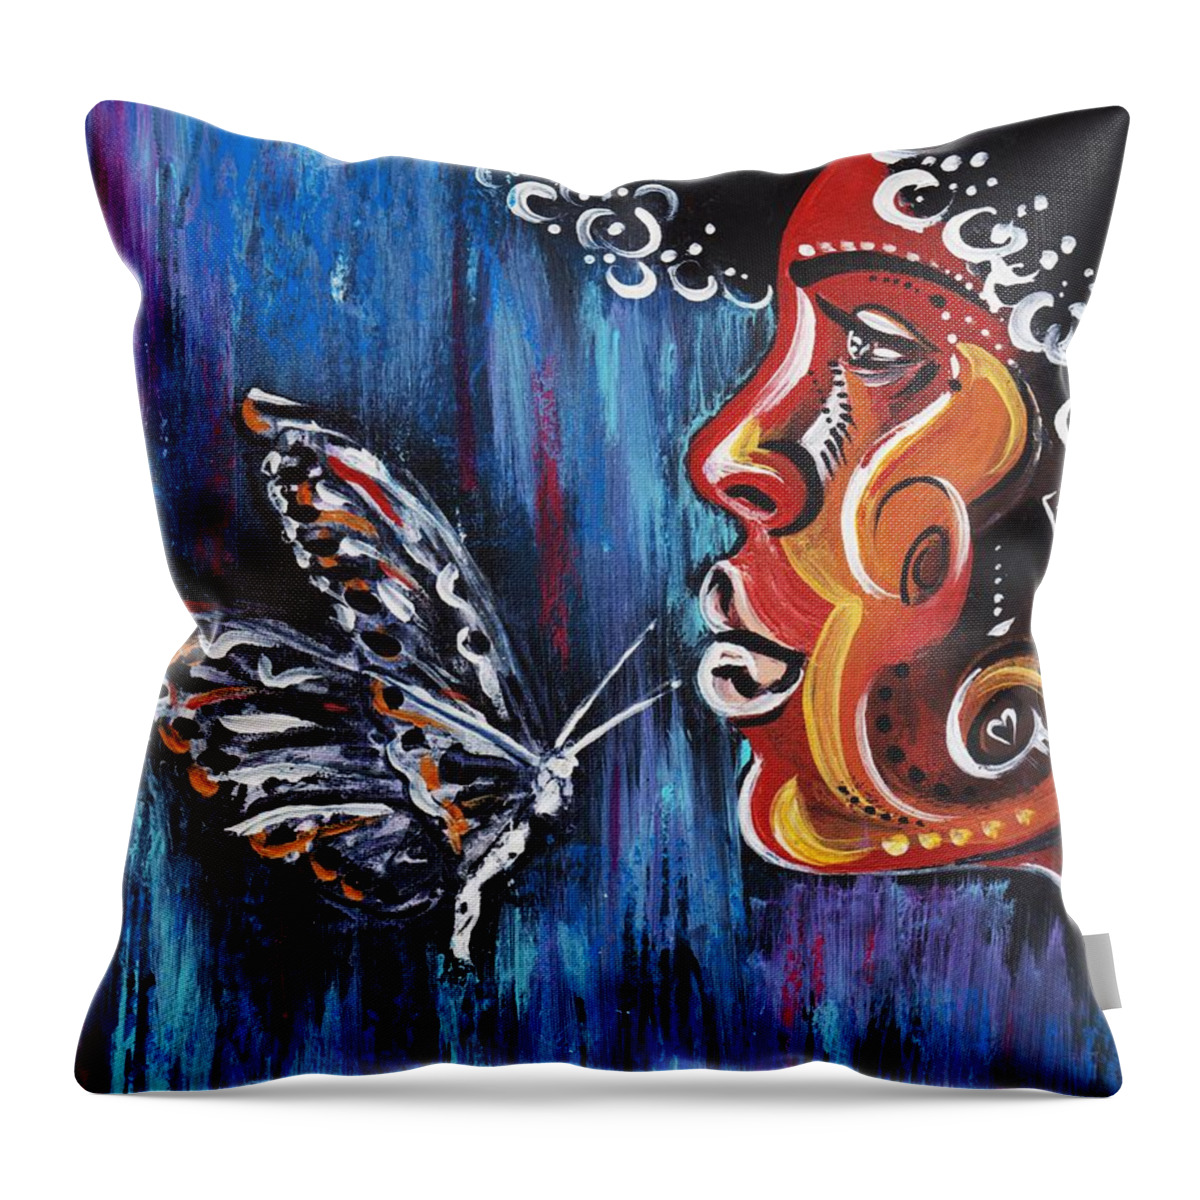 Butterfly Throw Pillow featuring the photograph Fascination by Artist RiA